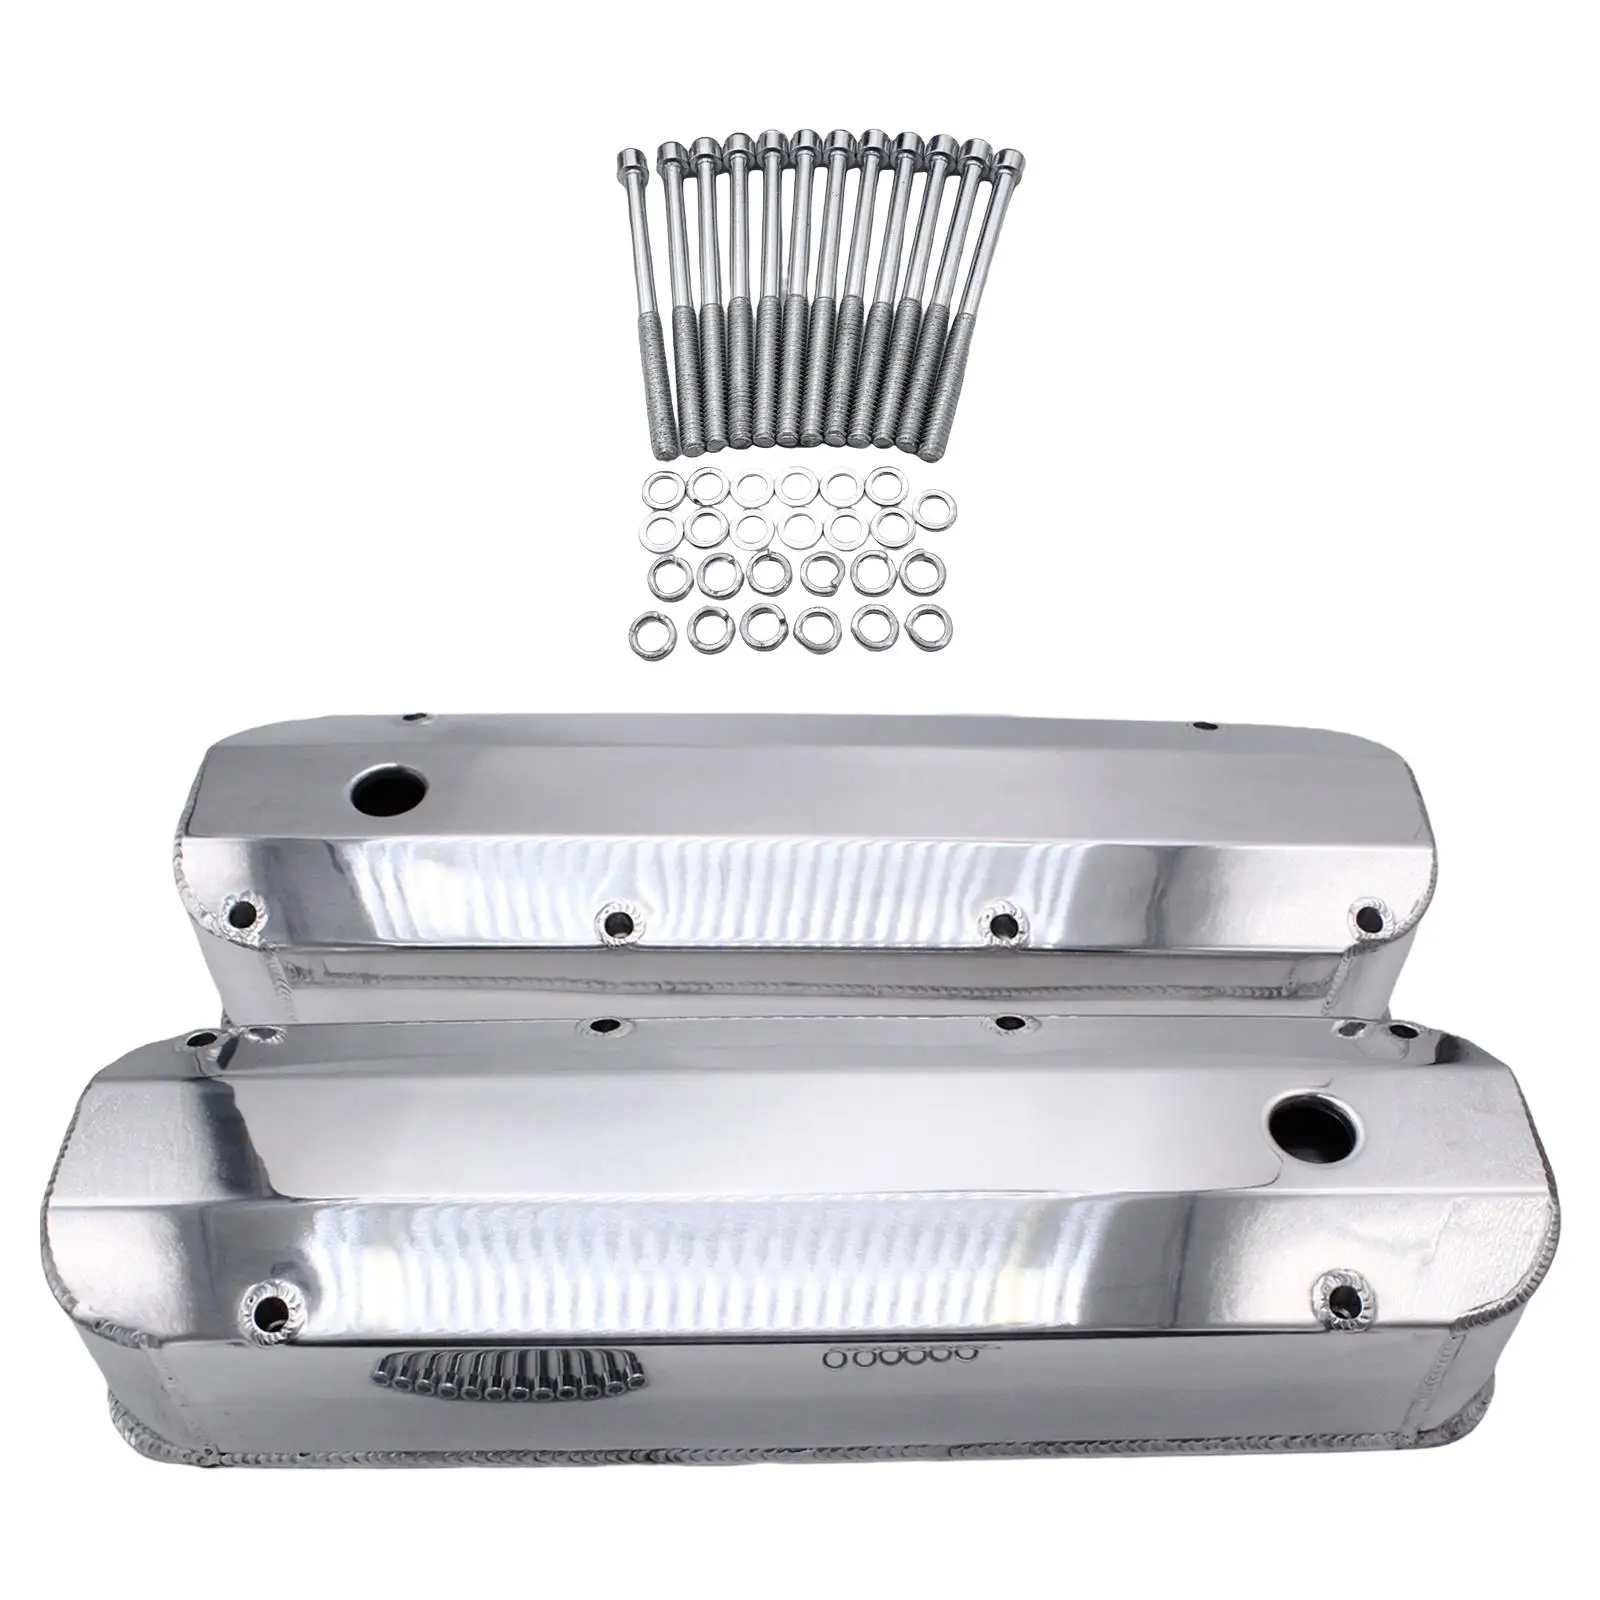 Valve Covers Replace Parts for Ford Big Block 429 460 High Performance